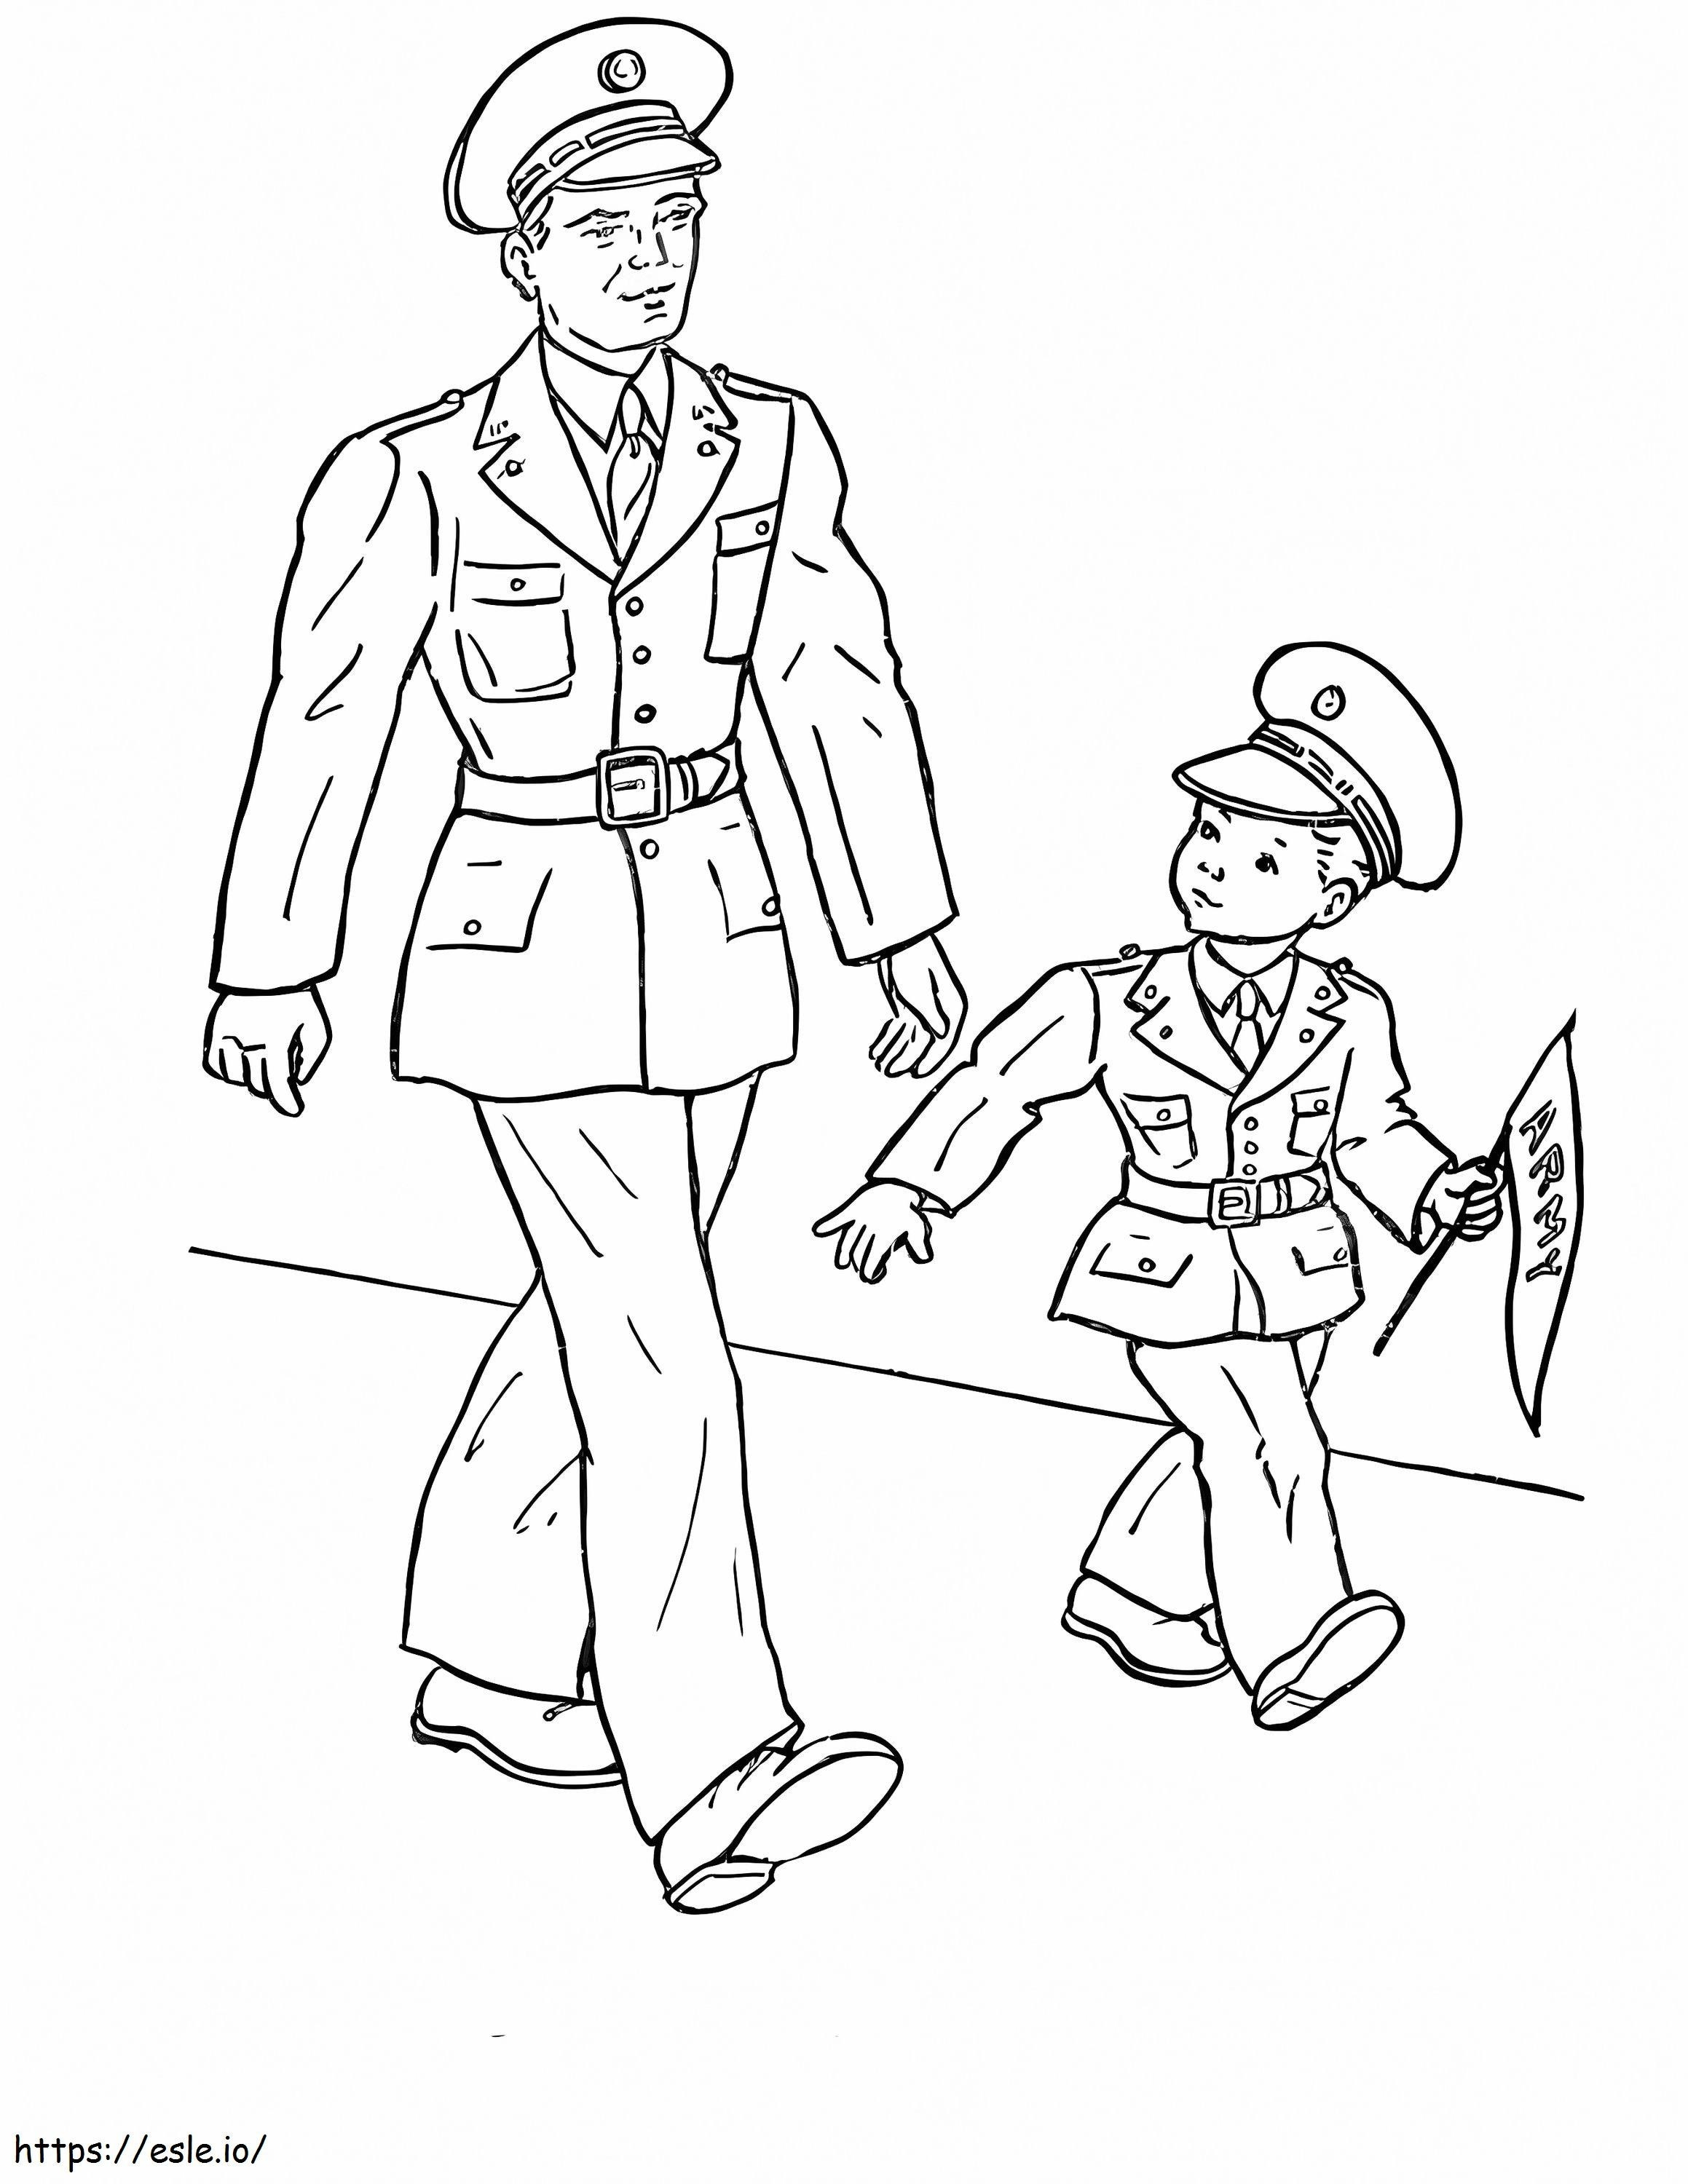 Veterans Day Grandfather And Grandson coloring page